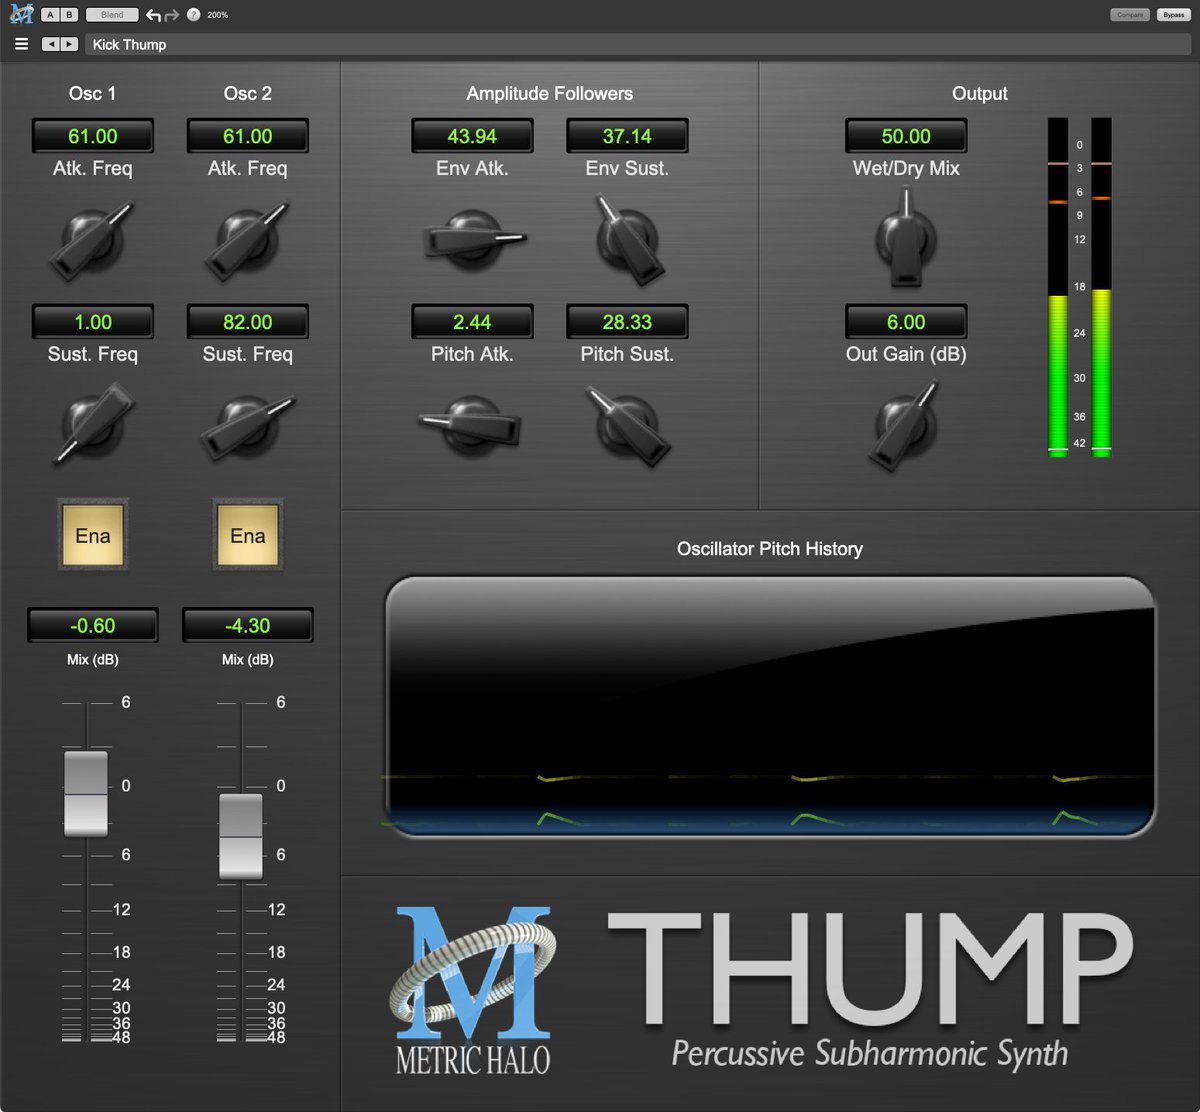 @MetricHaloAudio released their free sub synth Thump v4.  thanks guys mhsecure.com/products/softw…